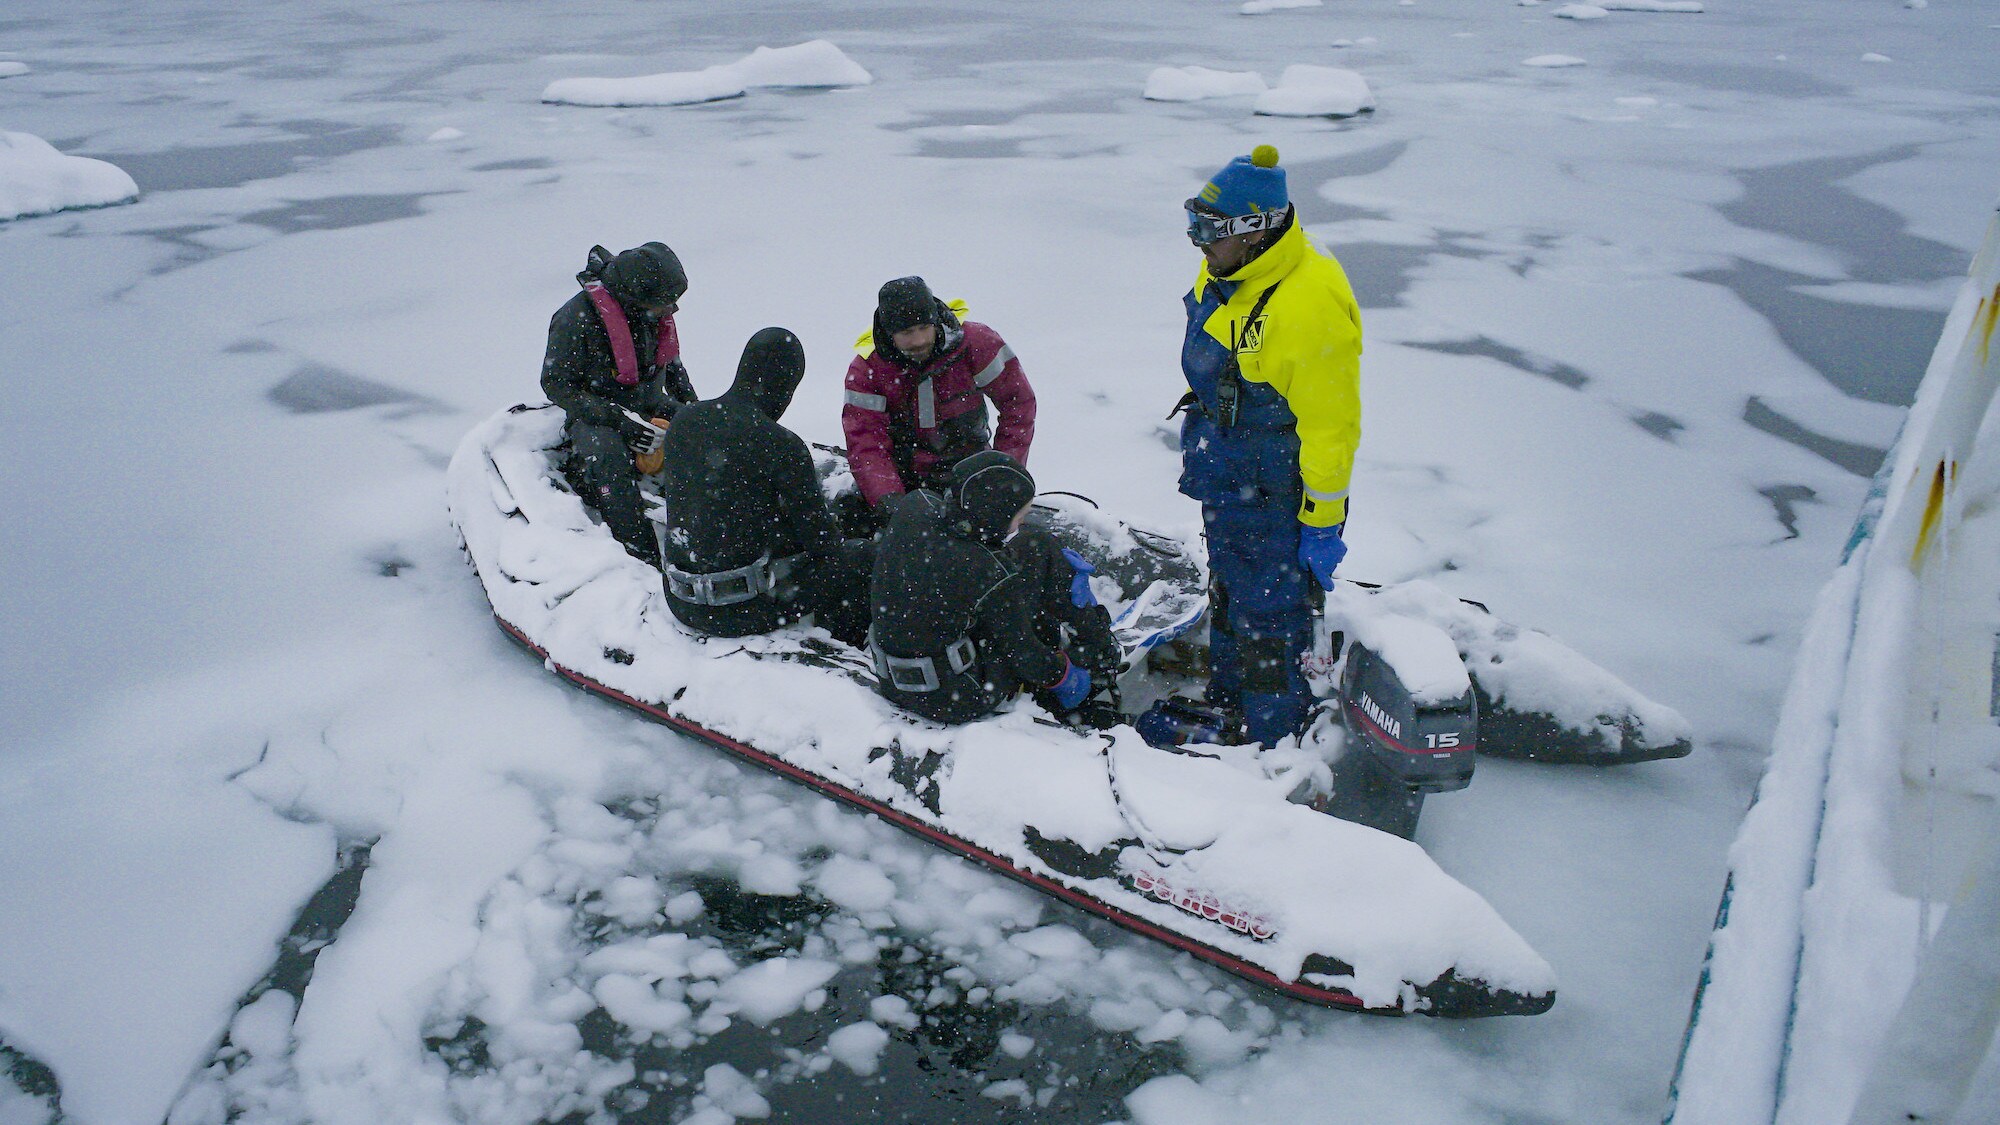 The crew sitting in a small rib boat on the iced water. (credit: National Geographic for Disney+/Will West)